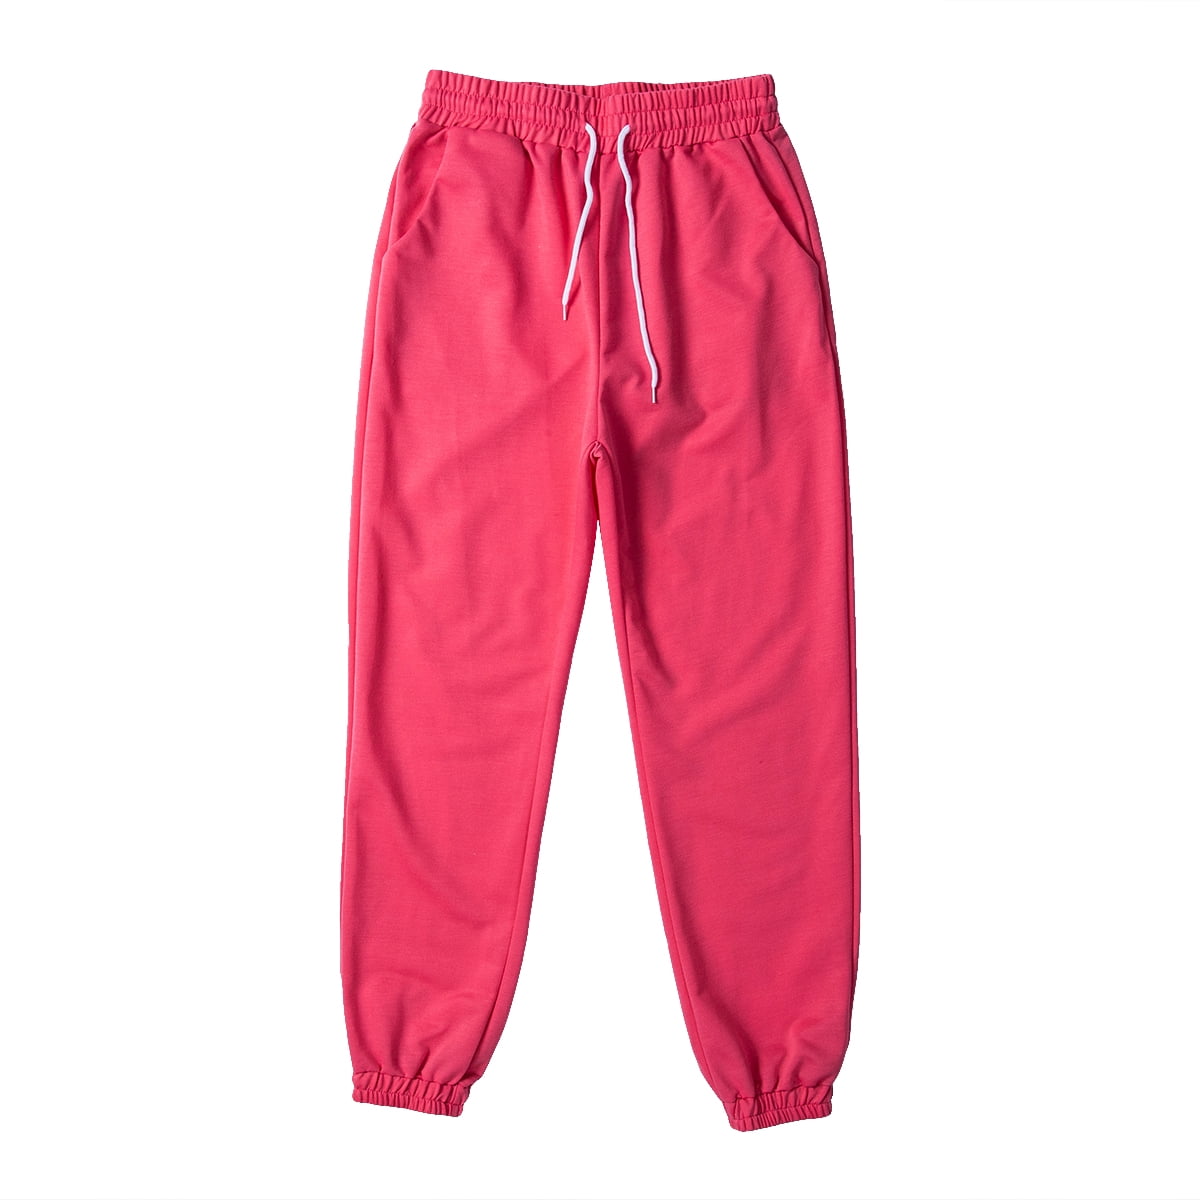 red jogging bottoms womens